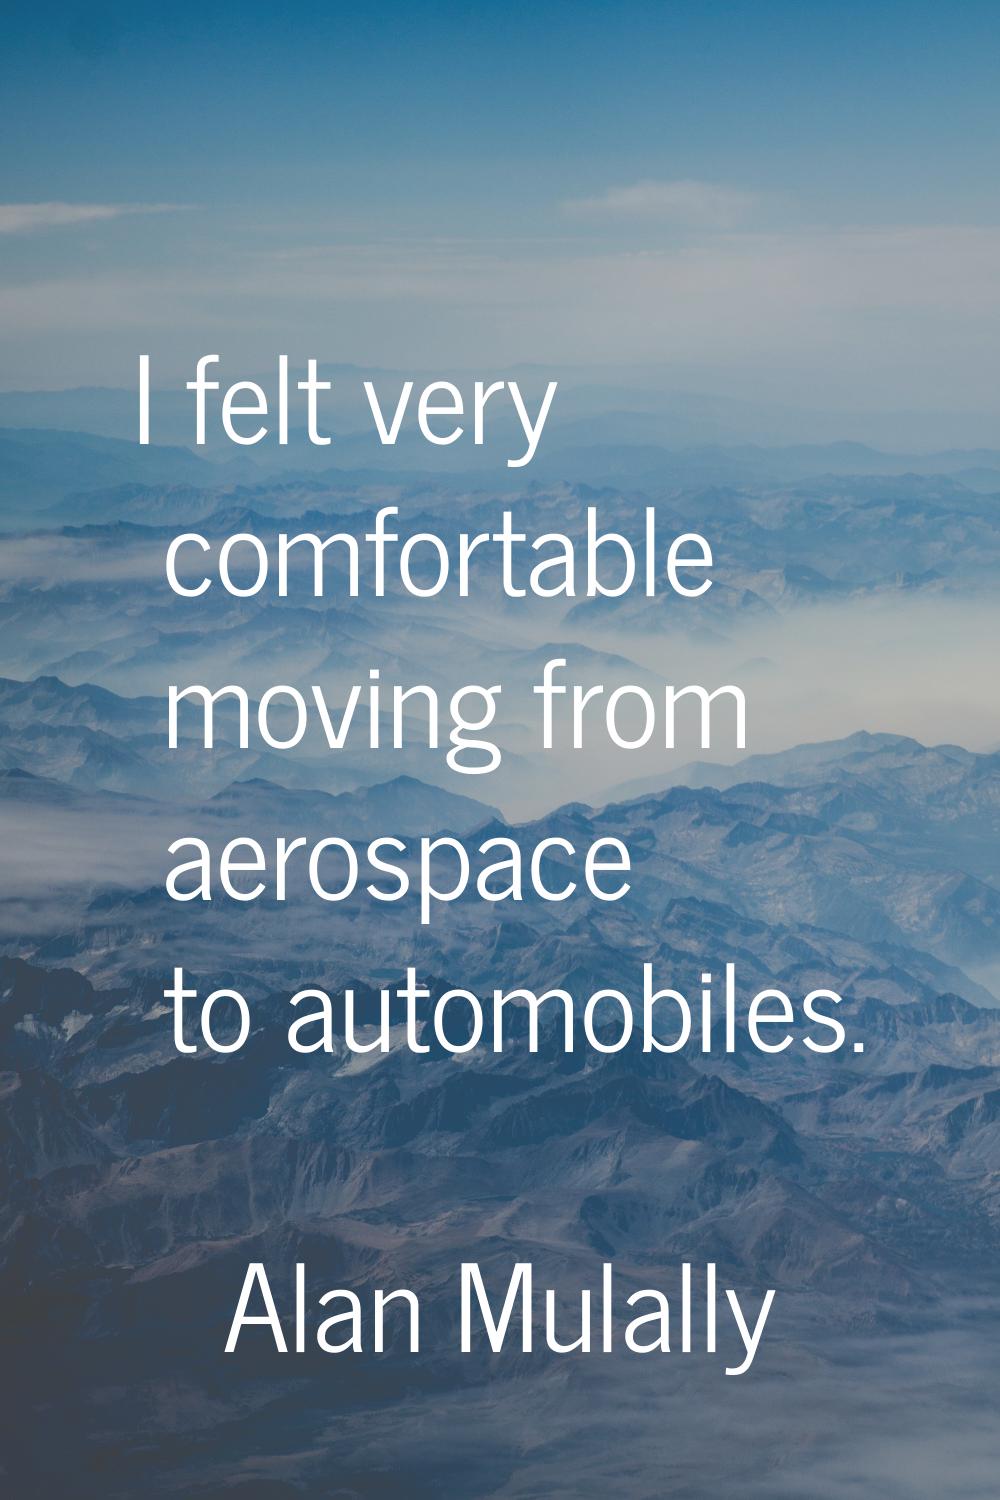 I felt very comfortable moving from aerospace to automobiles.